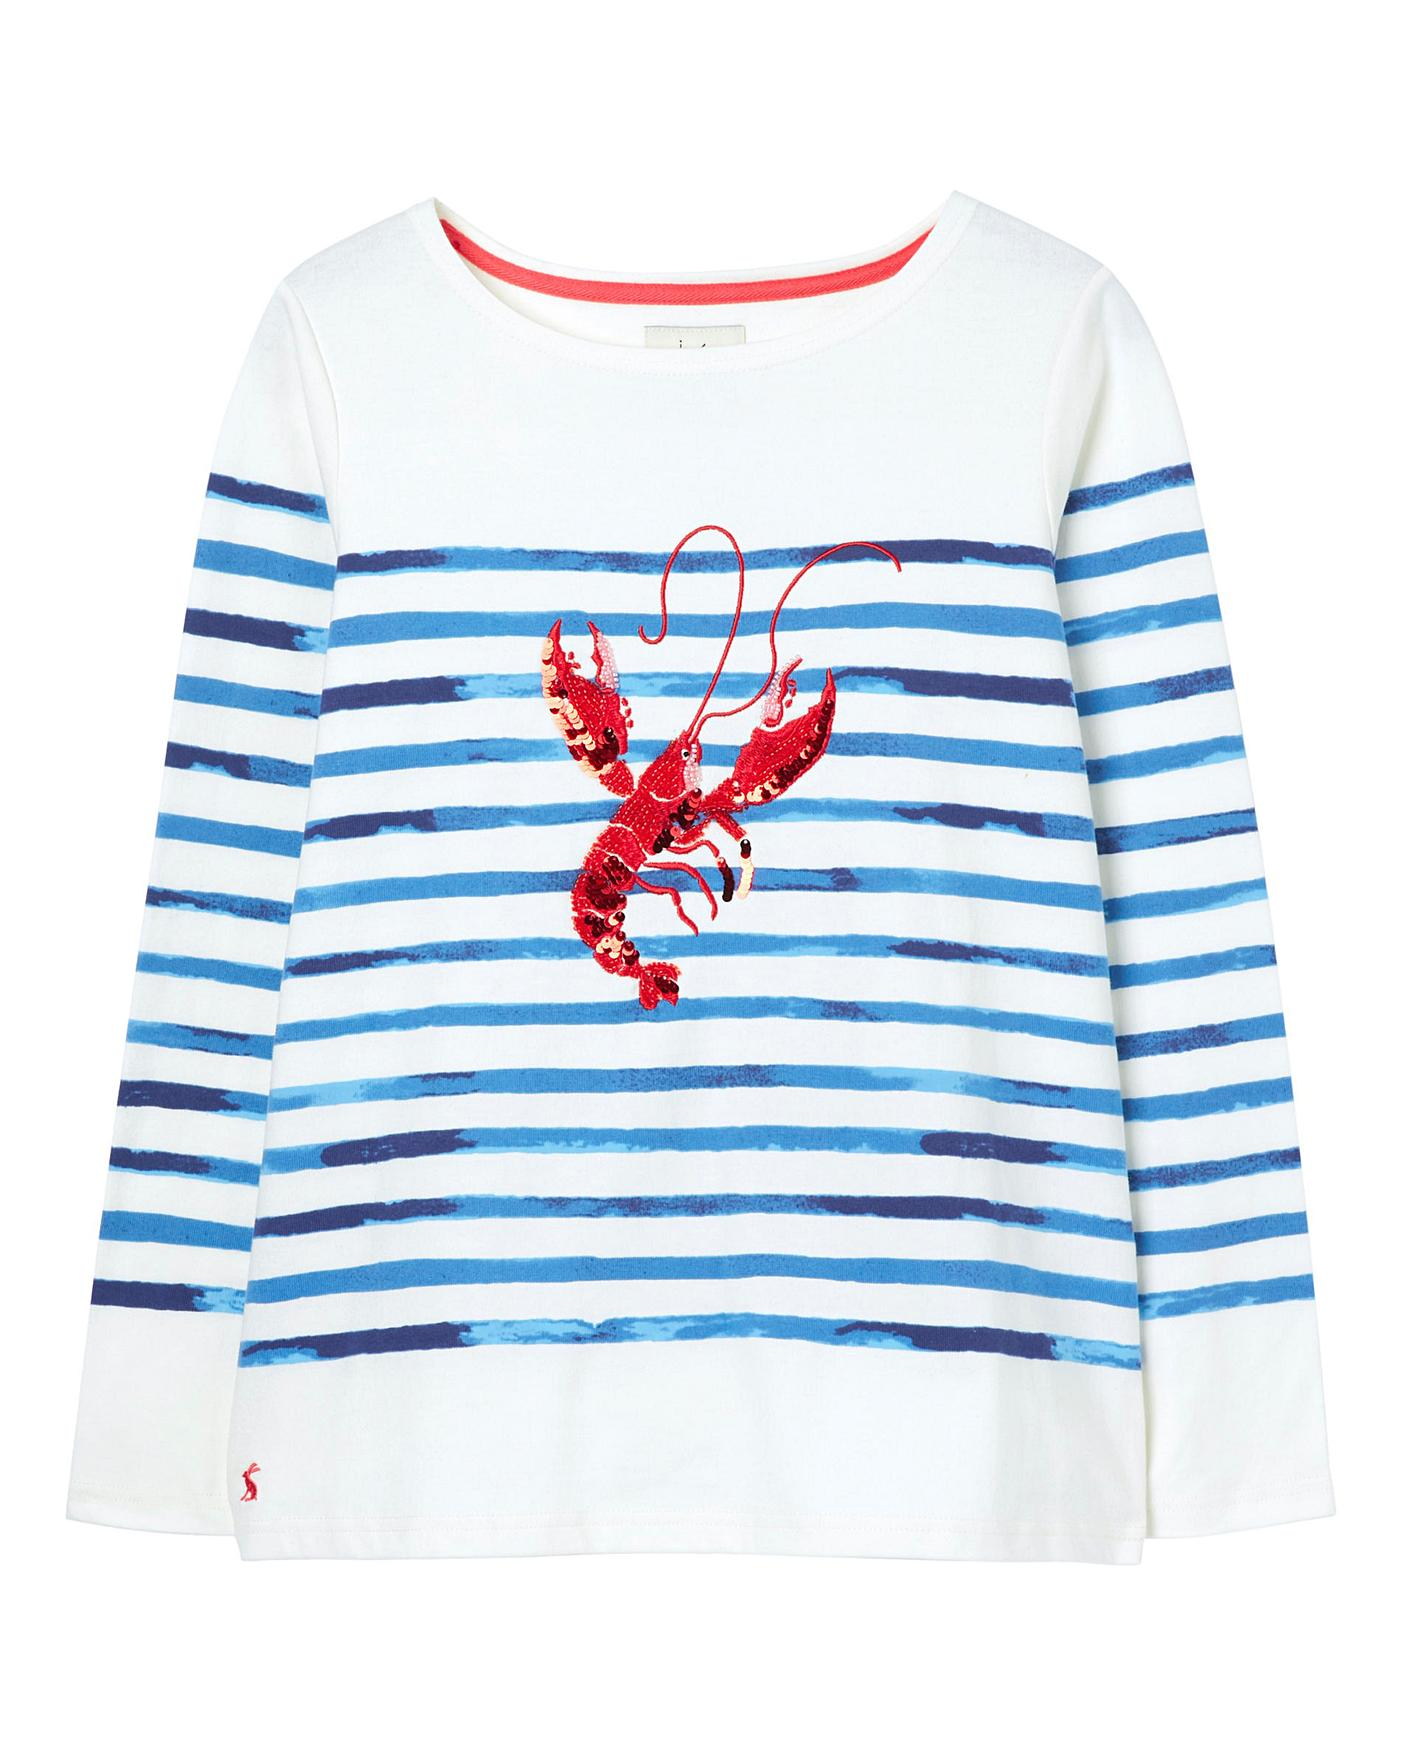 8.Joules Harbour Luxe Lobster Top €52.50, 